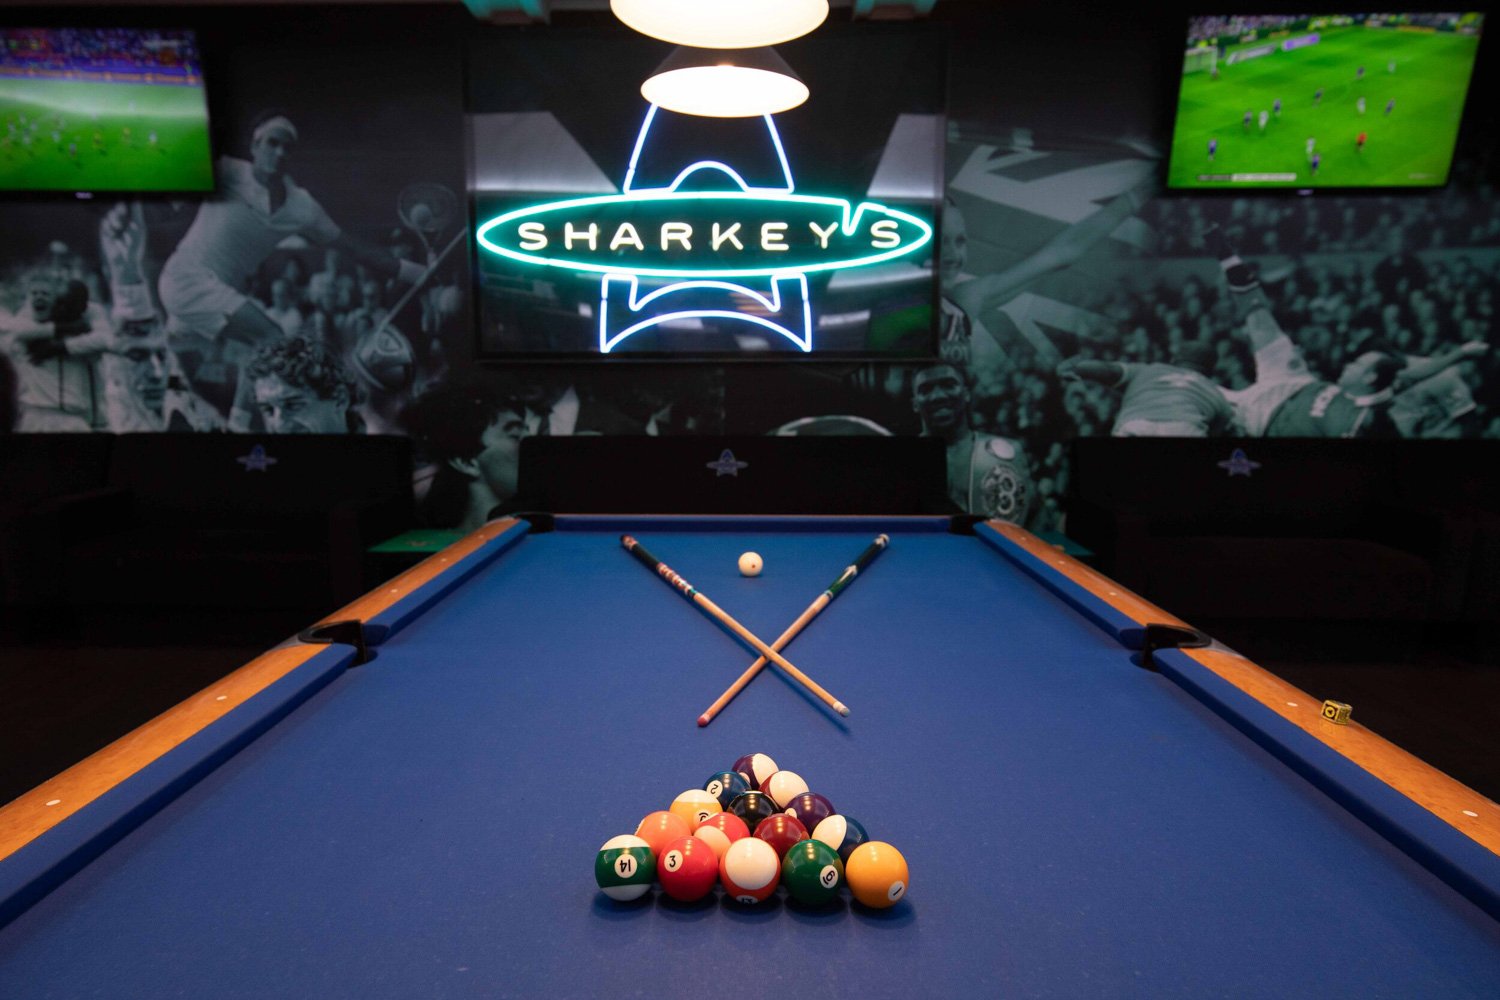 Sharkeys_Sports_Bar_Bournemouth_Live_Sports_Poole_Snooker_Table_Tennis_VIP_Rooms_Consoles-16.jpg